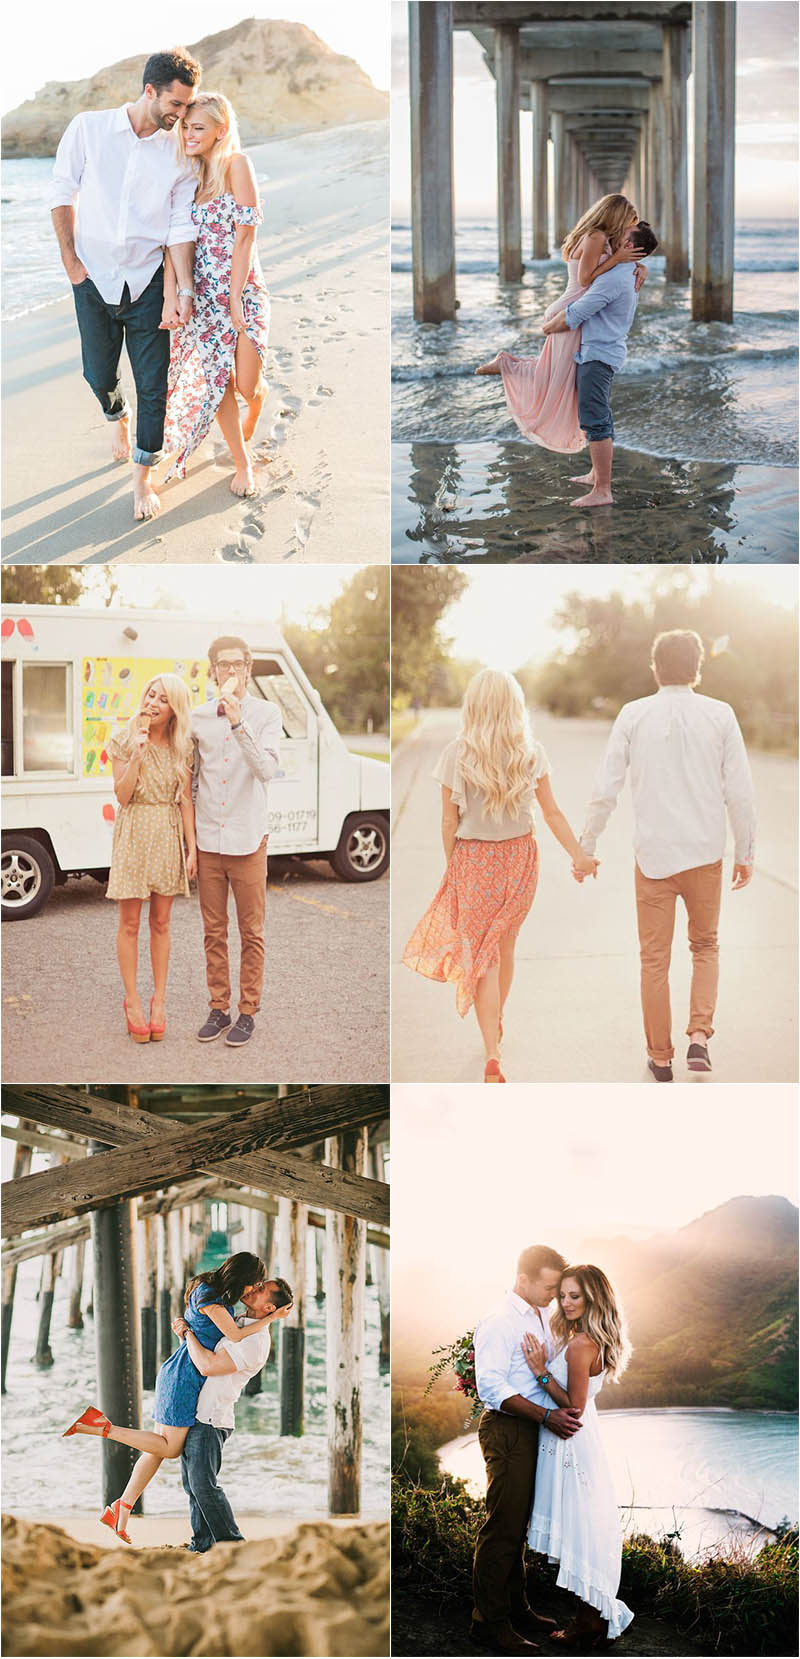 romantic and cool summer engagement photo shooting ideas